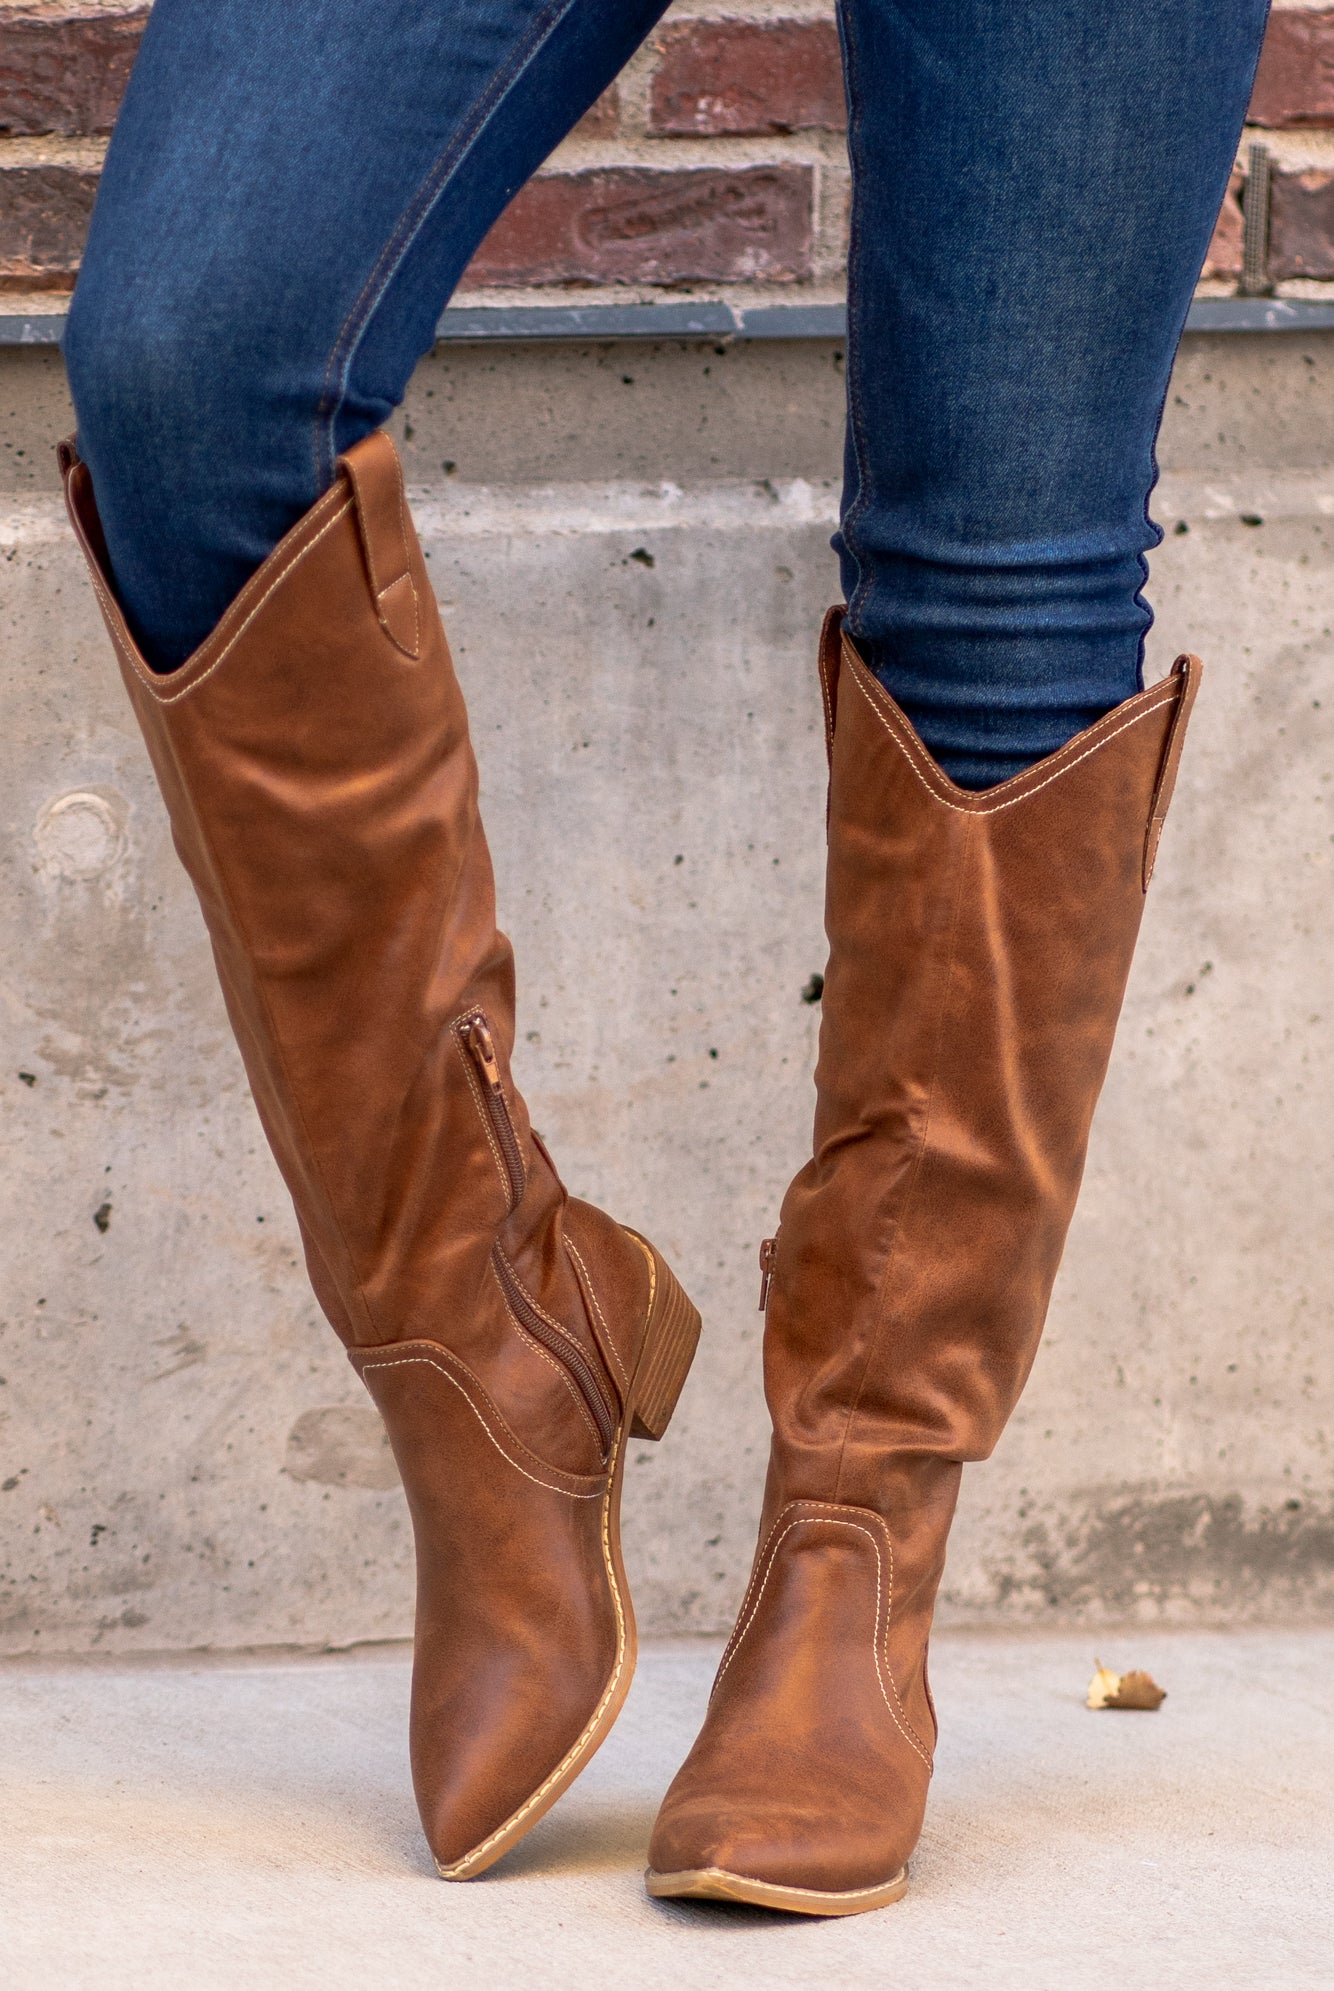 Boots by Oasis Society  A riding knee-high boot with a zipper and block heel with a v cut to elongate the legs. Color: Brown Man-made Upper Leather Wrap heel Padded footbed Shaft Height: 15" Heel Height: 2" Contact us for any additional measurements or sizing. 